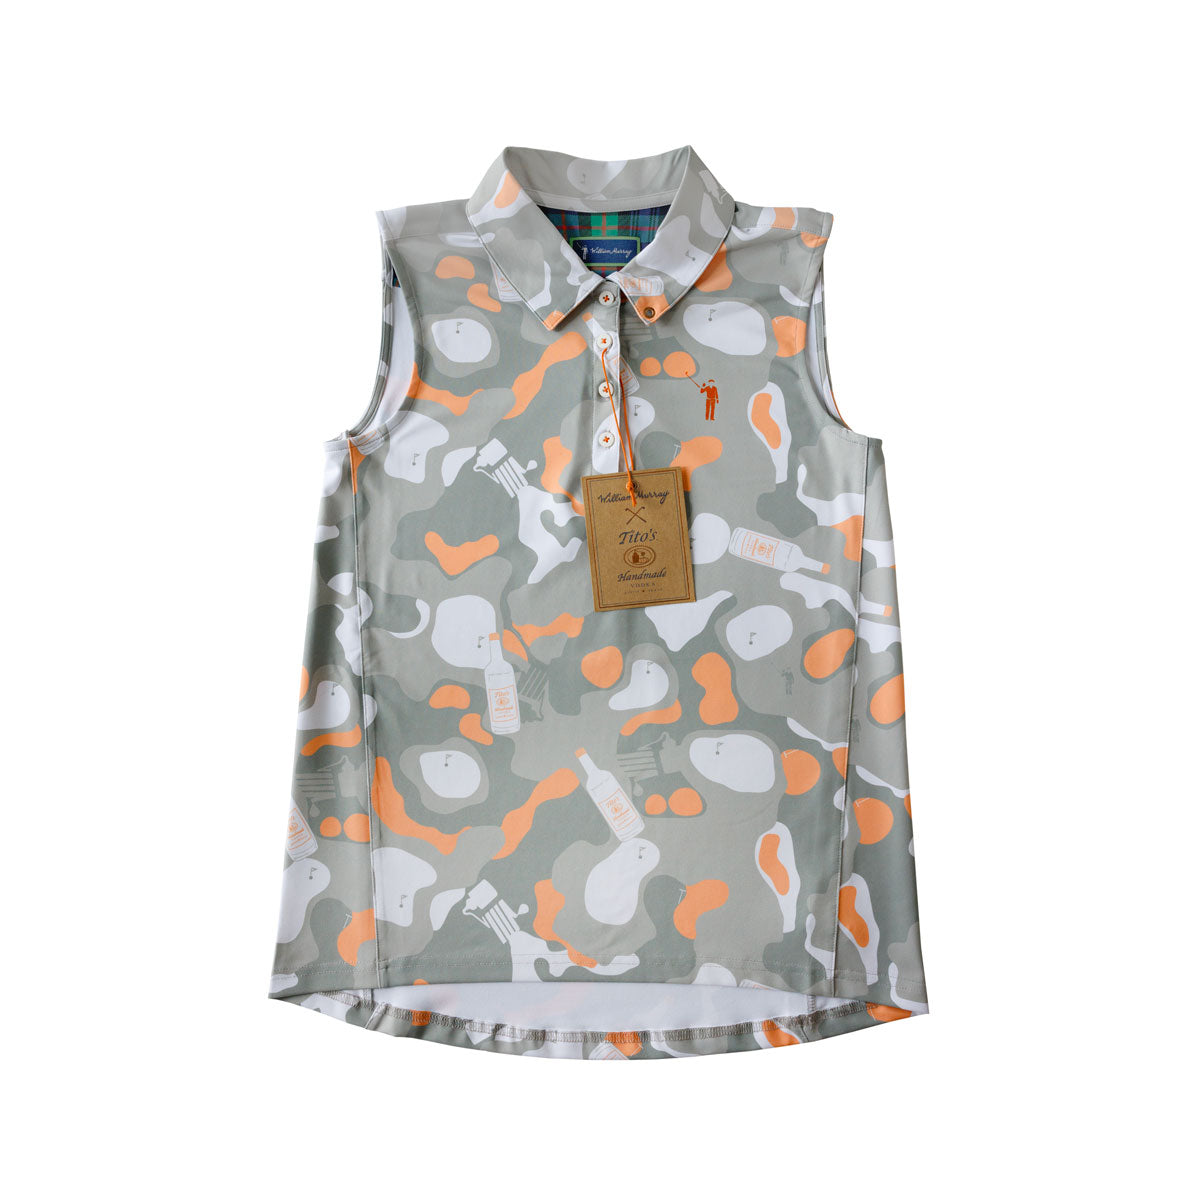 Front of gray and orange camouflage polo tank with Tito's Handmade Vodka bottle and pot still designs and William Murray logo